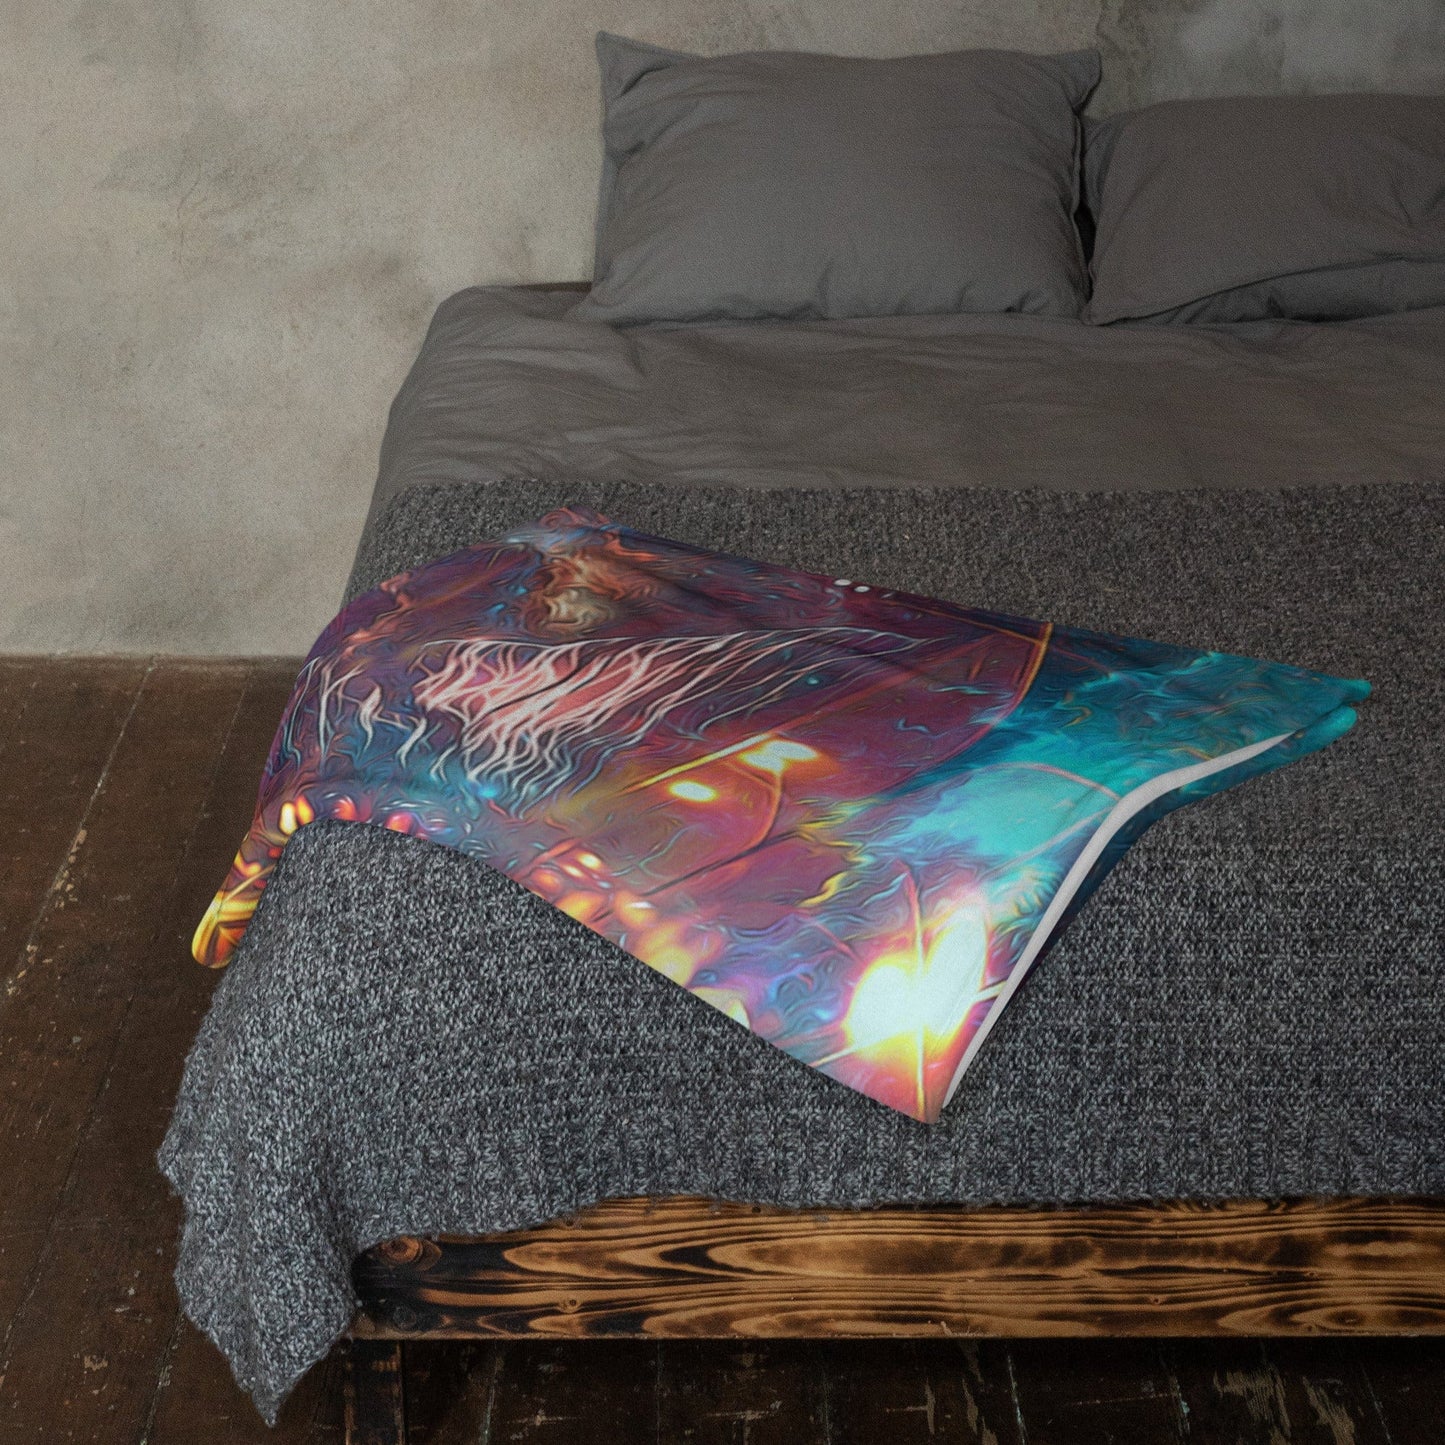 "The Wanderers" - DMT THROW BLANKET